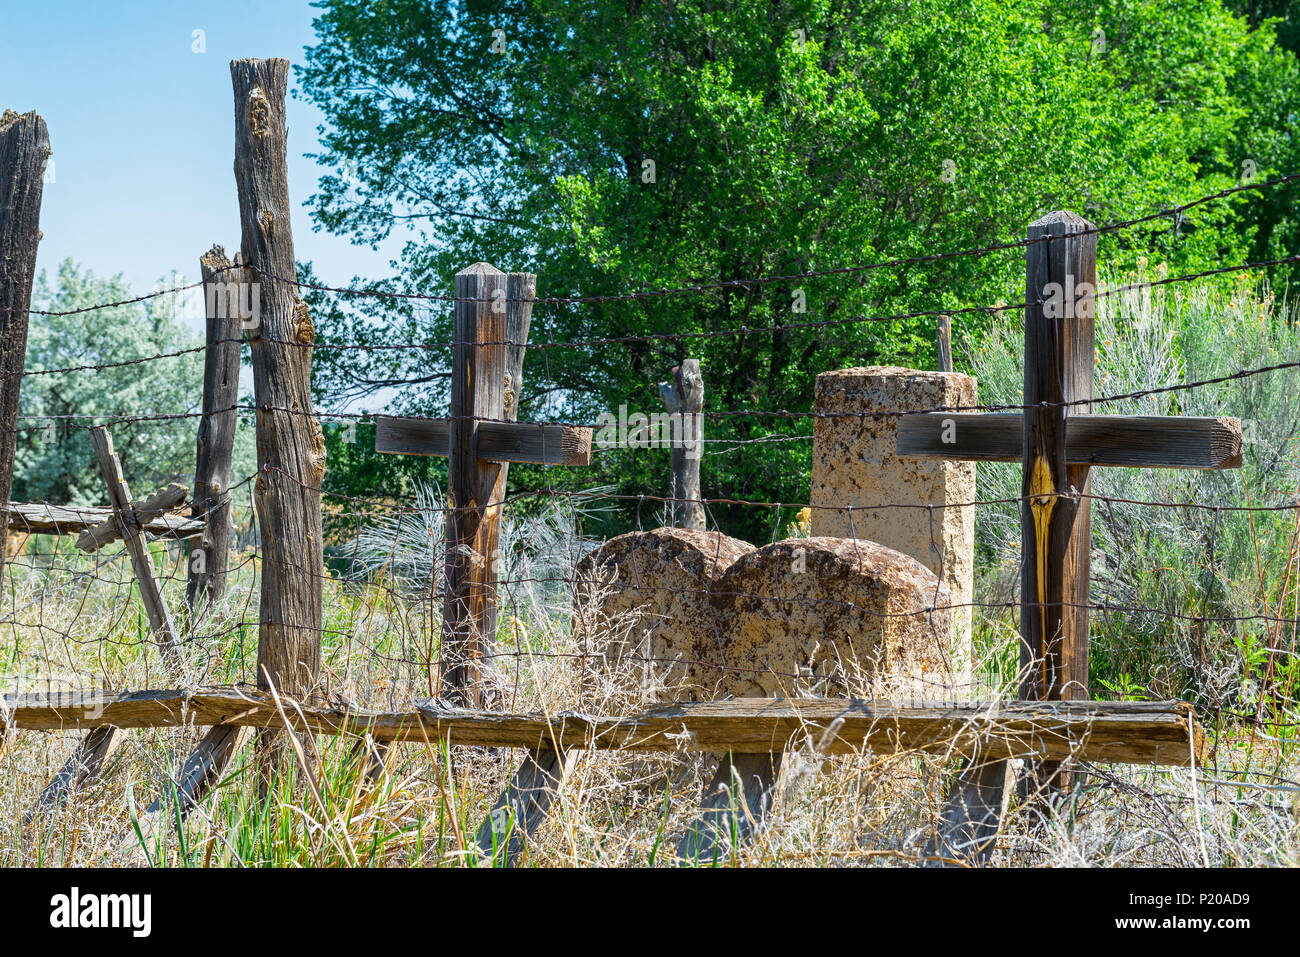 Old New Mexico Graveyard with Wood Crosses and Headstones,  an old Ladder and Barbed Wire Fence, Tall Grass and Trees. Stock Photo